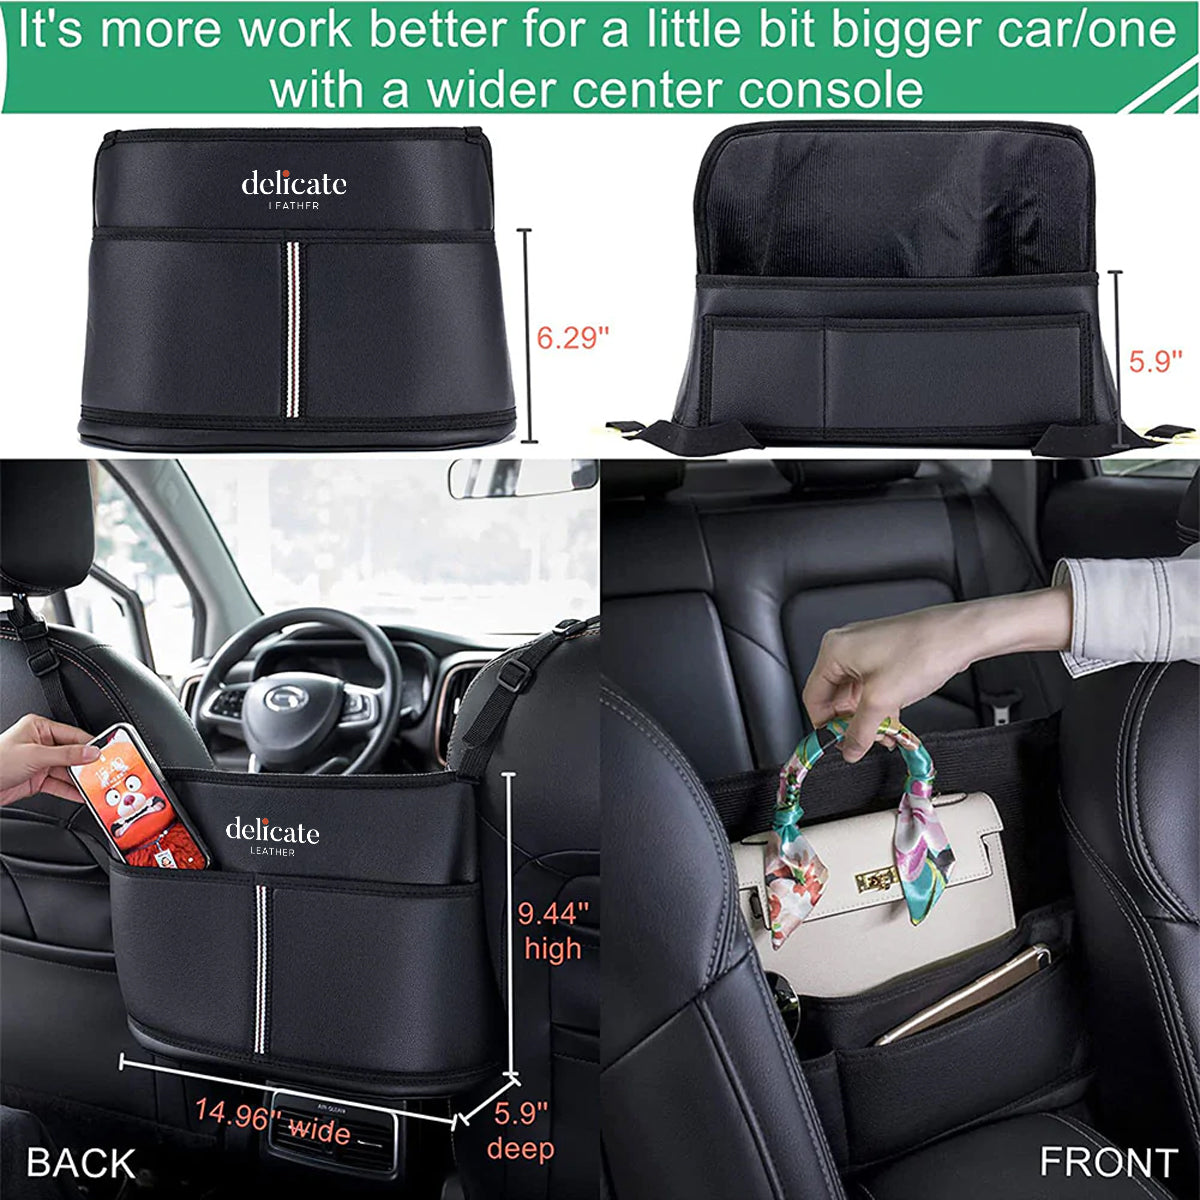 Car Purse Holder for Car Handbag Holder Between Seats Premium PU Leather, Custom Fit For Your Cars, Auto Driver Or Passenger Accessories Organizer, Hanging Car Purse Storage Pocket Back Seat Pet Barrier NS11991 - Delicate Leather